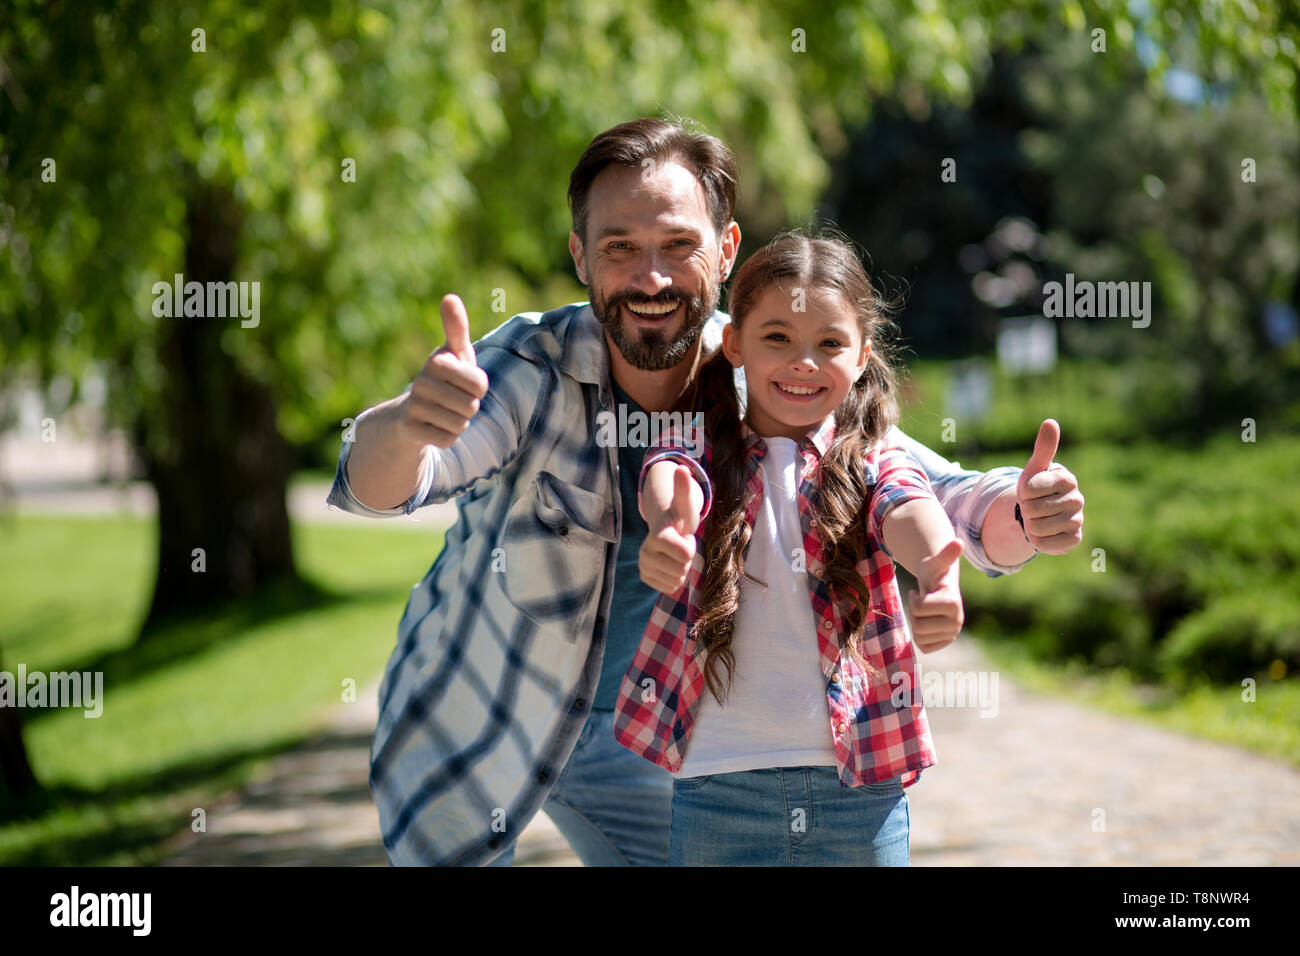 Happy Father And Daughter In City Park Showinh Together Thumb up. Happy Loving Family Concept. Stock Photo